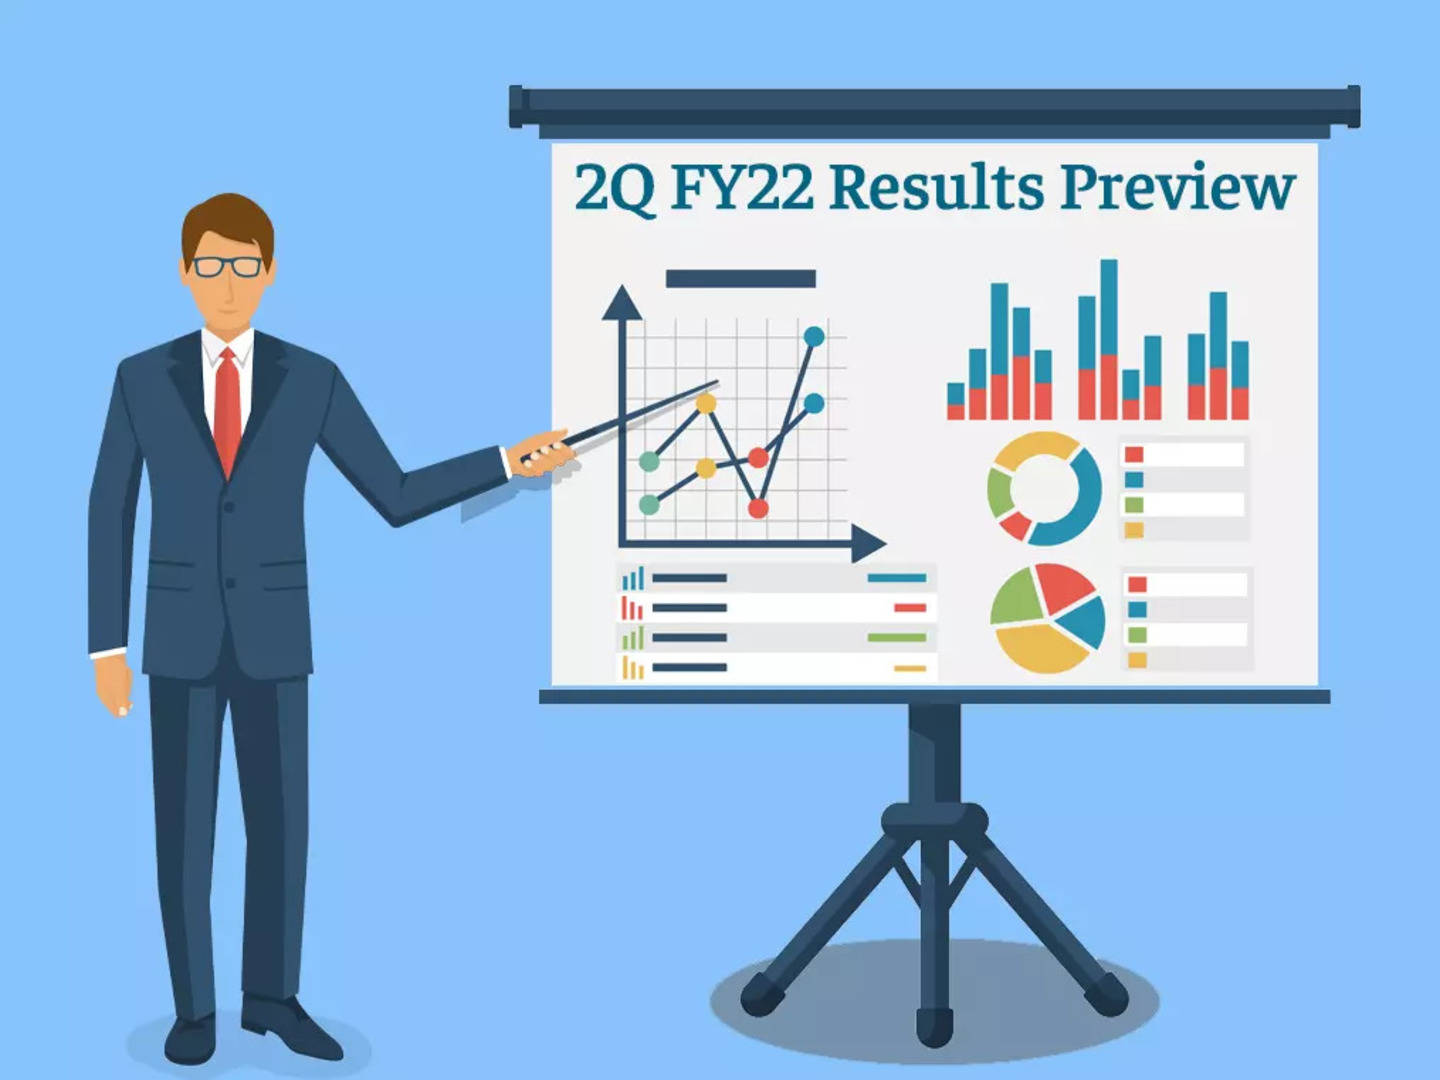 Q2 FY22 preview: Tariff hikes to push Airtel’s growth; Jio’s modest outlook as Vi fights for its turf